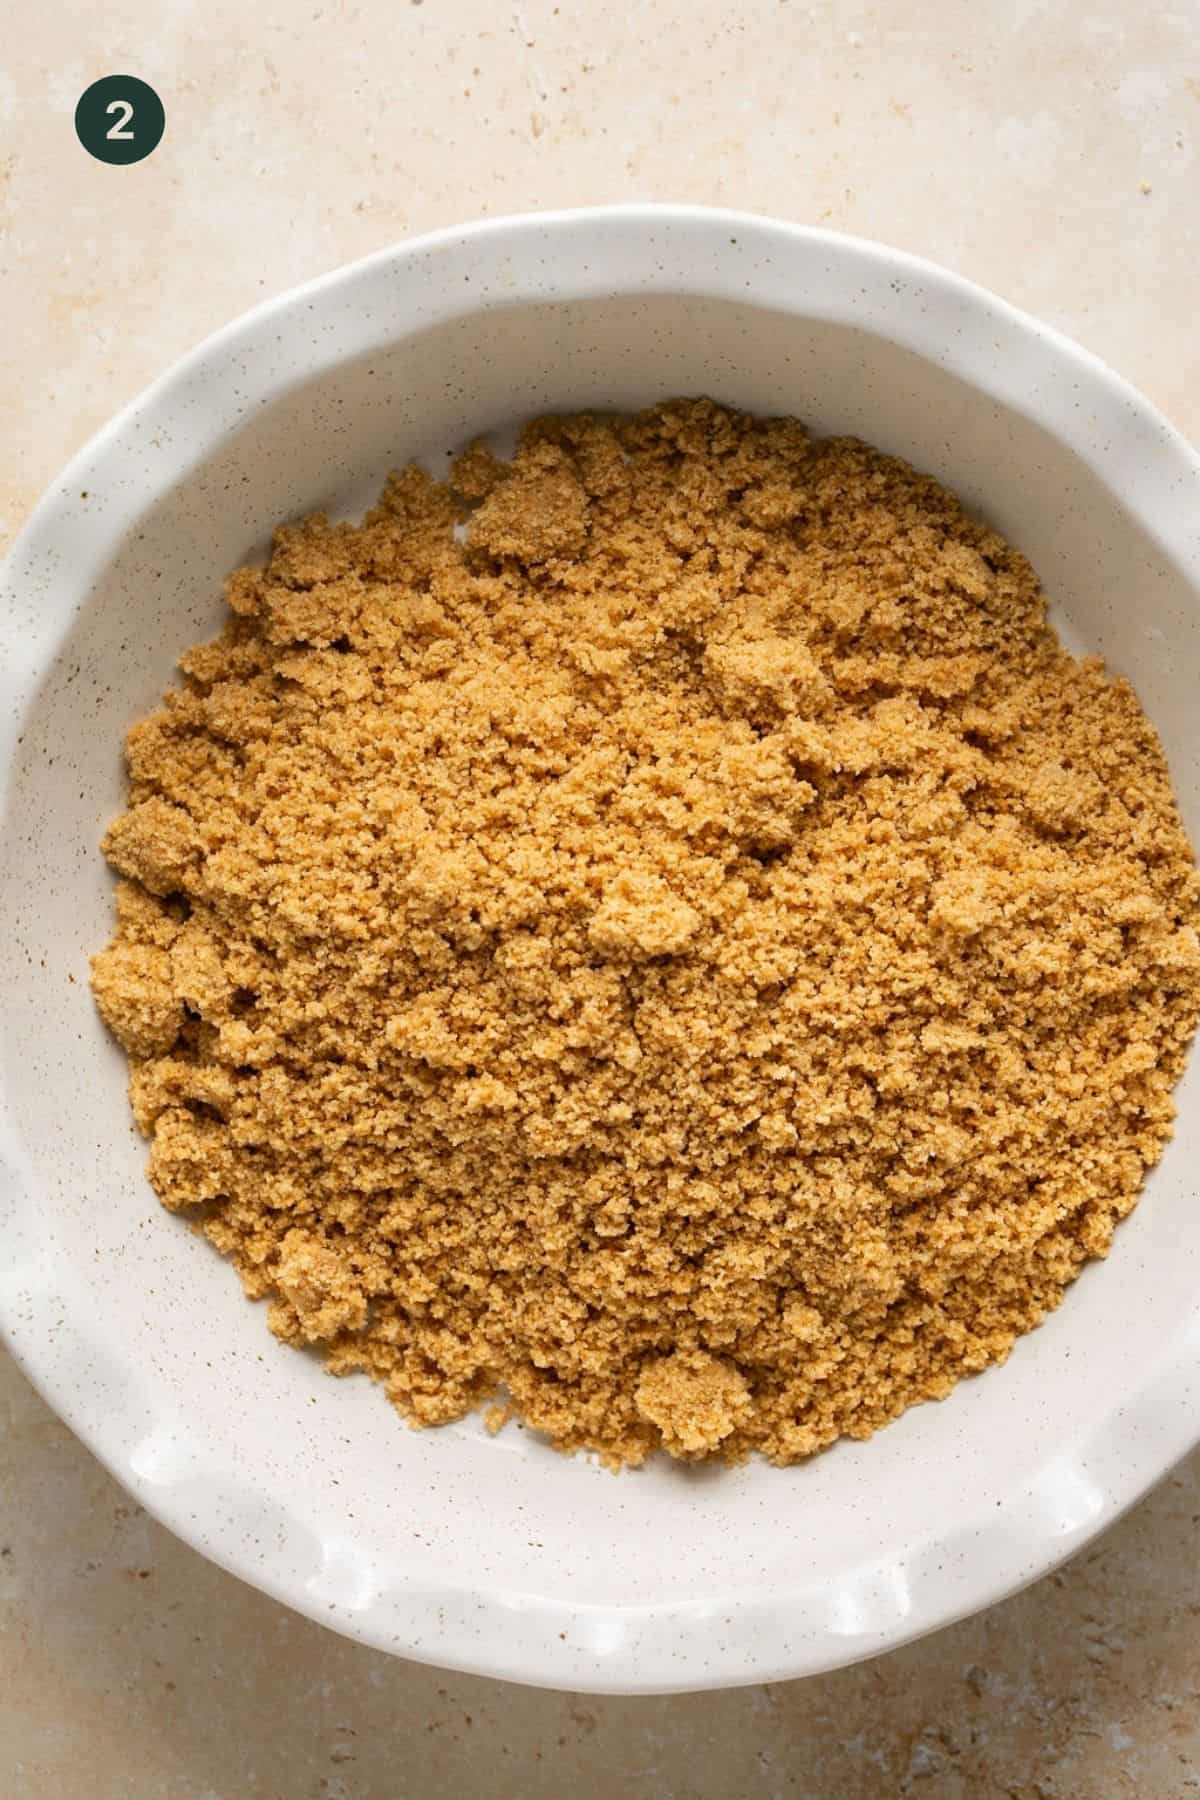 Graham crackers combined with coconut oil to resemble wet sand.